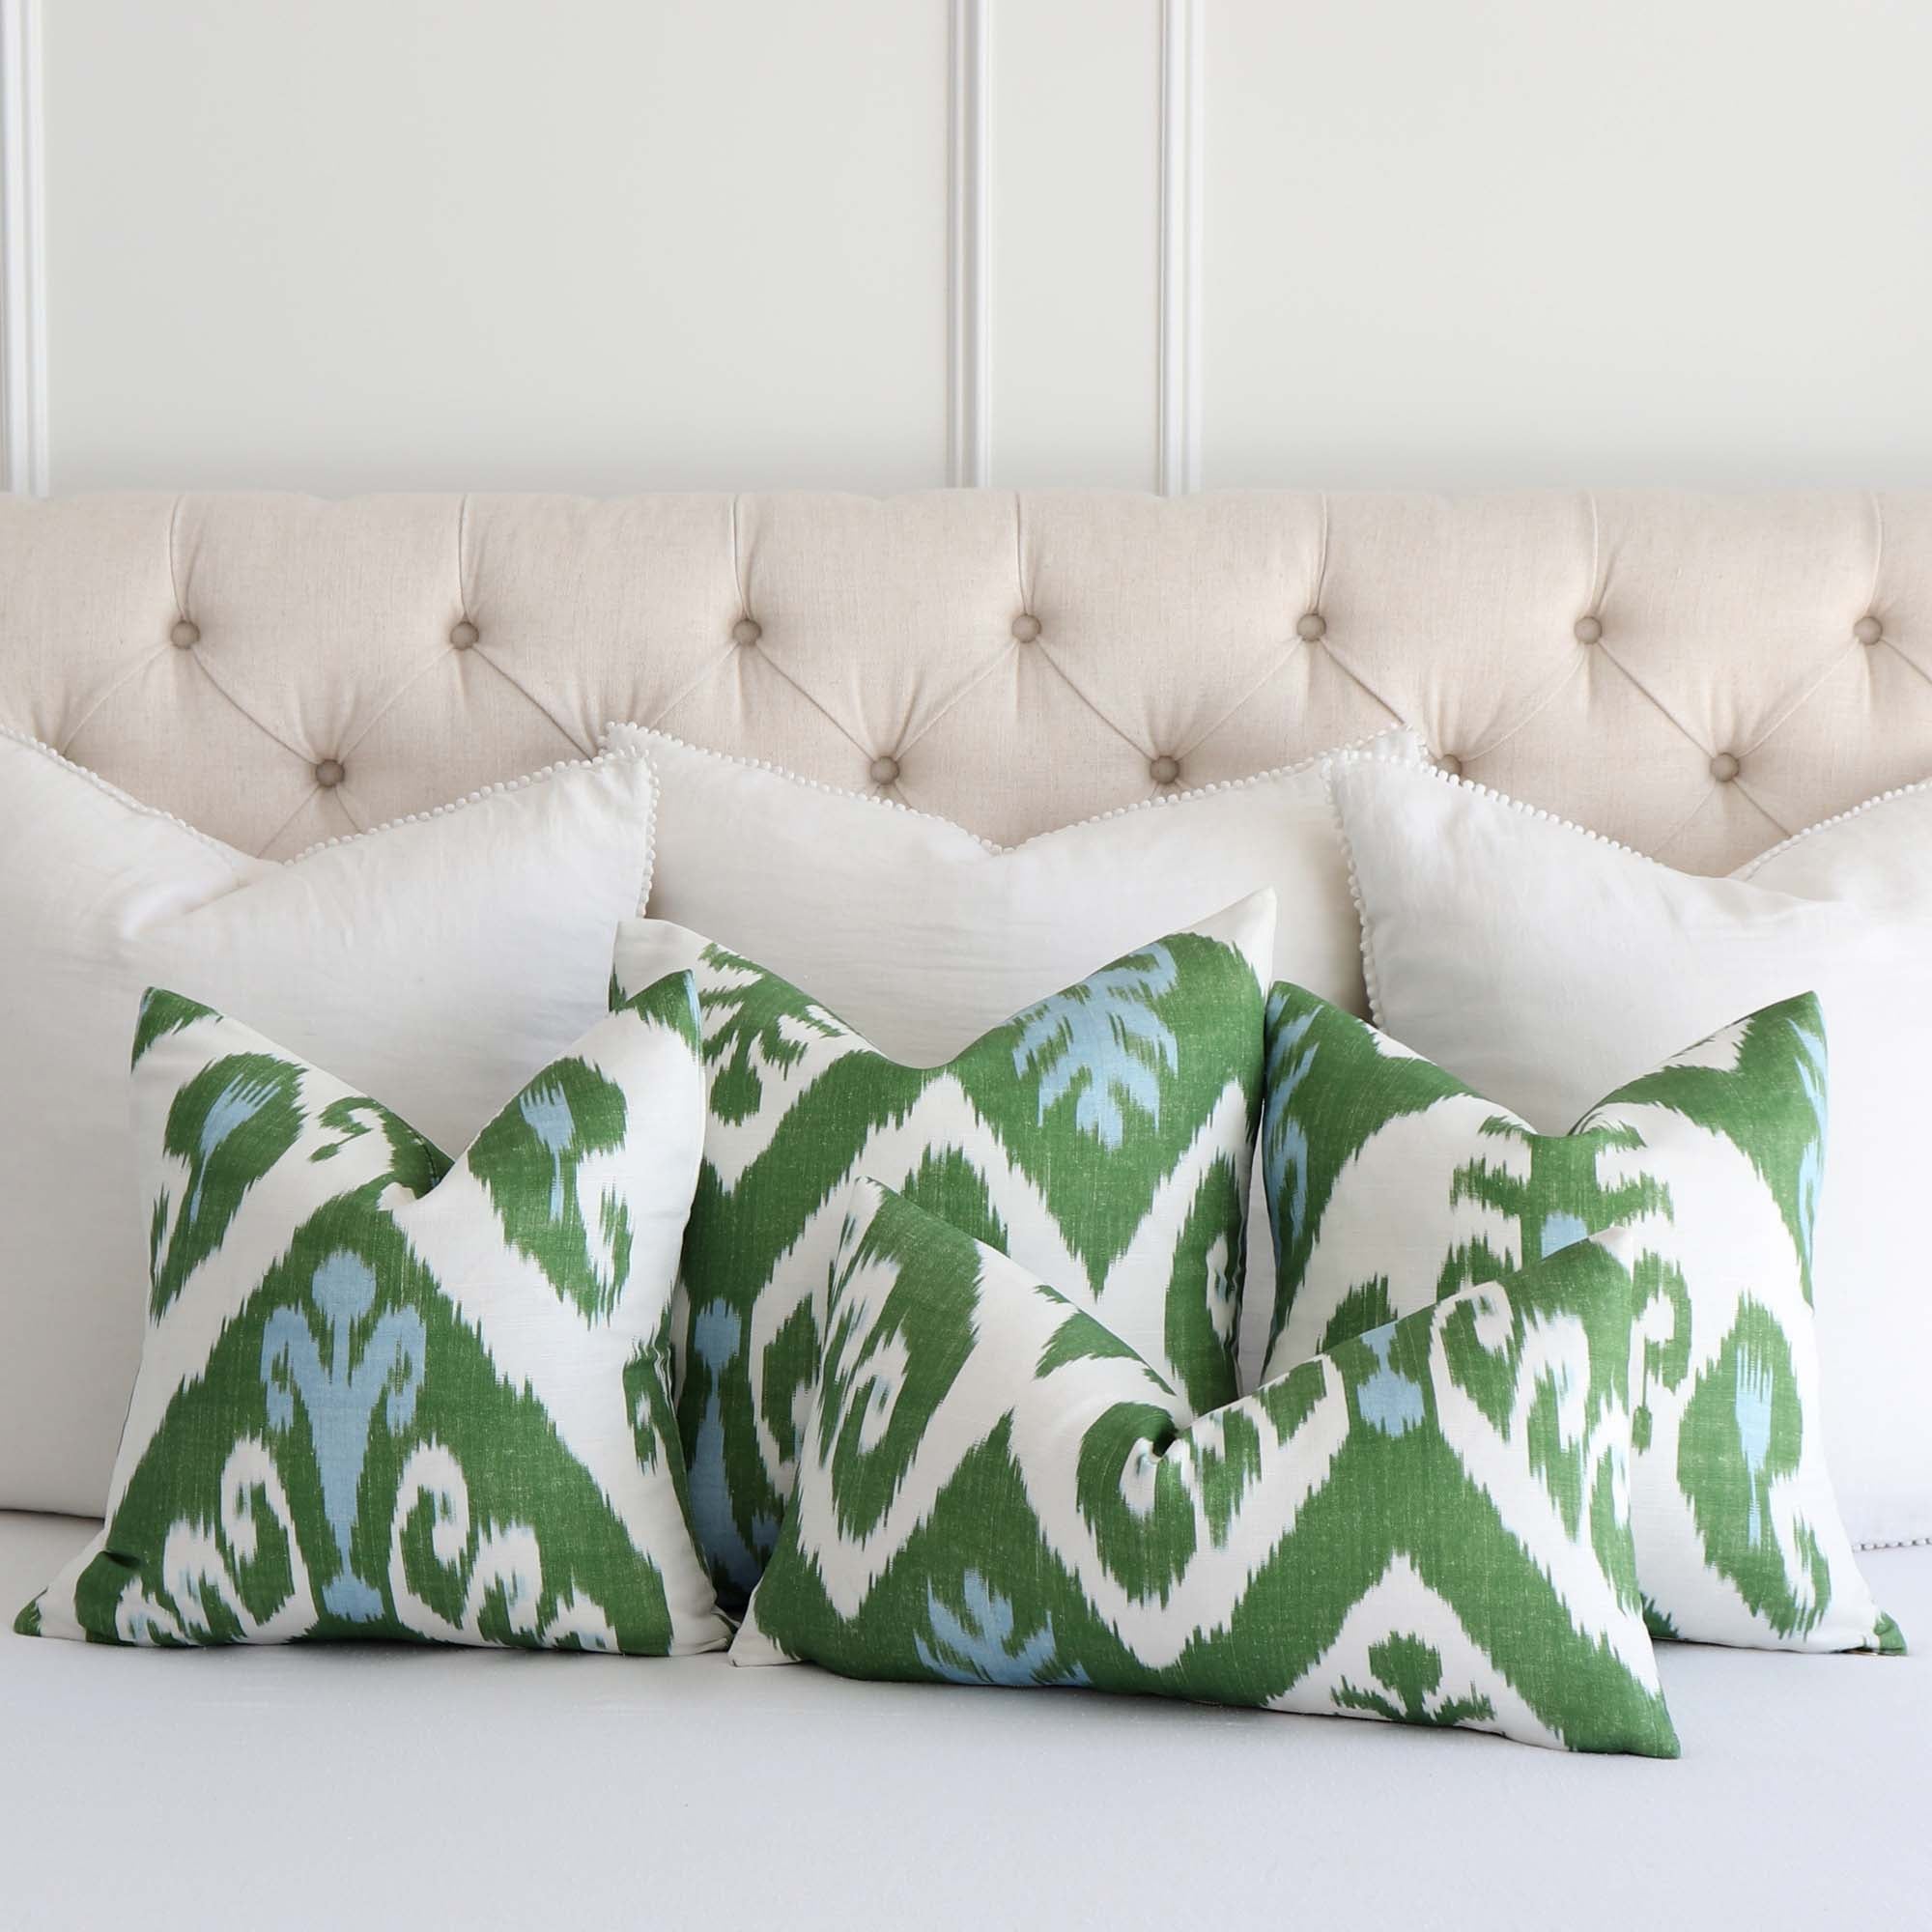 Thibaut Indies Ikat Green Large Scale Bold Graphic Designer Decorative Throw Pillow Cover with Pattern Placement Options